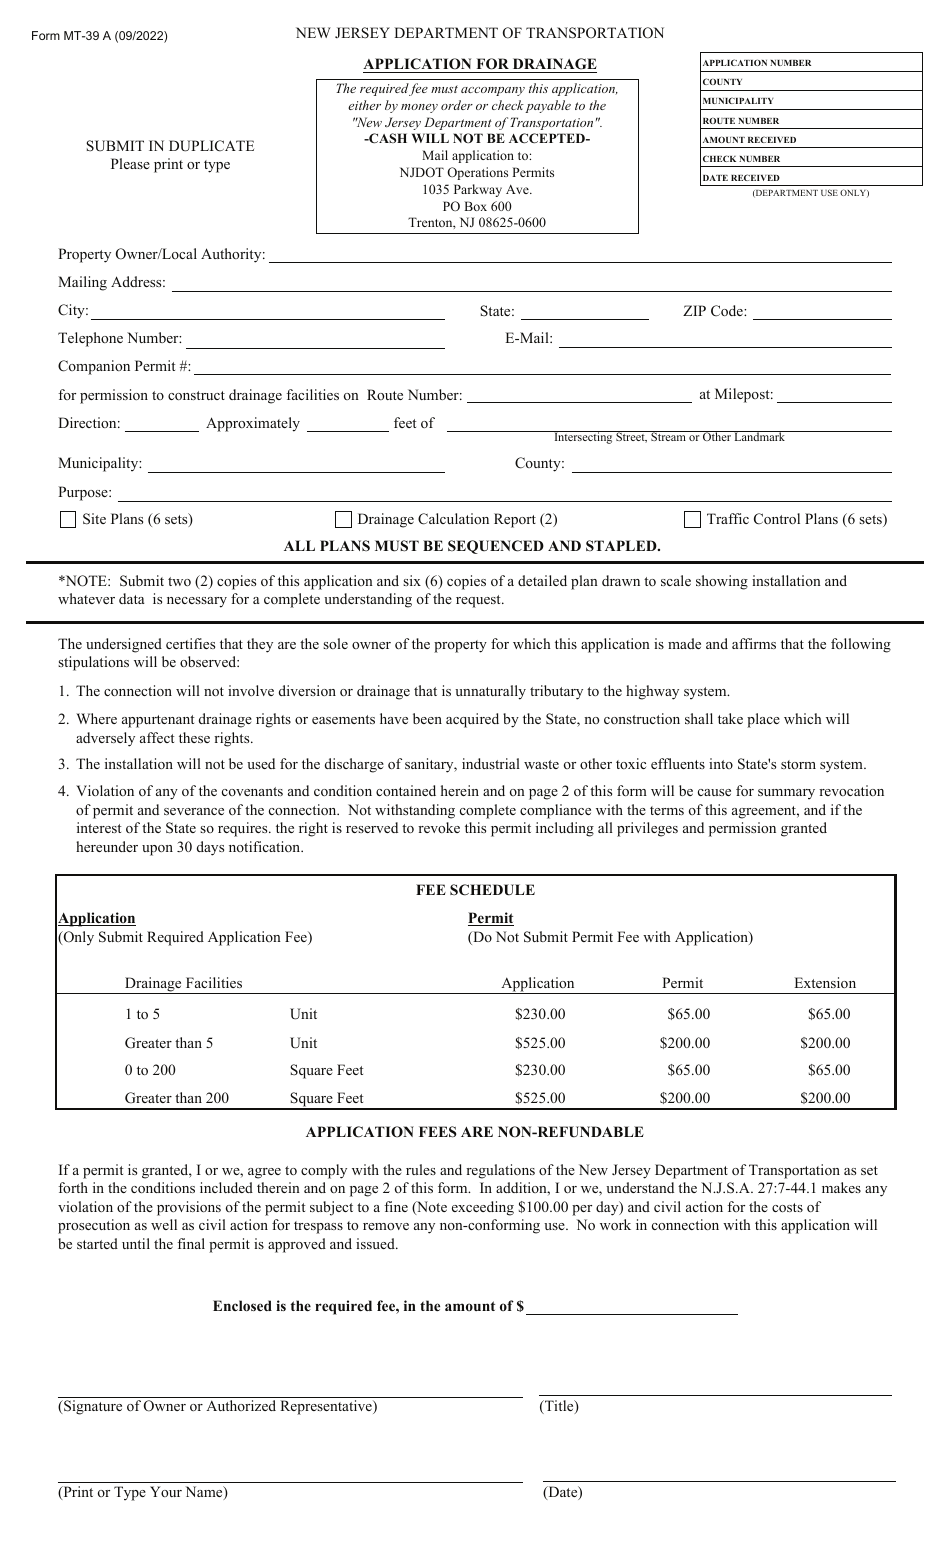 Form MT39A Application for Drainage - New Jersey, Page 1